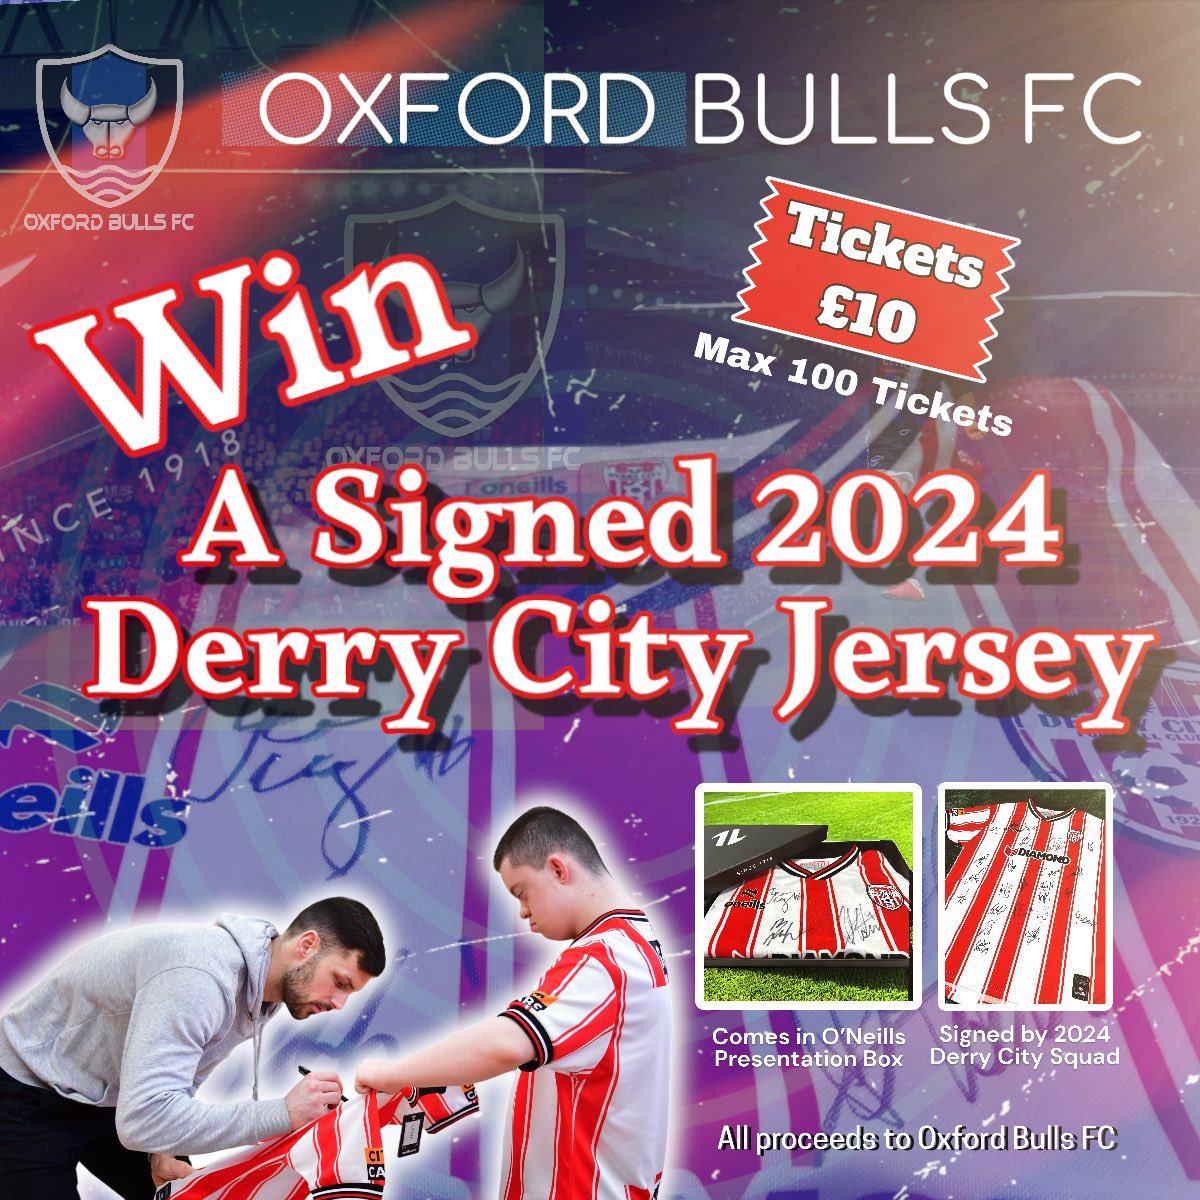 All @derrycityfc fans. I’m raffling a brand new DCFC jersey signed by the 2024 squad. Jersey comes in exclusive O’Neills presentation box with all proceeds going to @BullsOxford Draw limited to 100 tickets (no’s 1-100). No’s are £10 each. Gimme a shout if you want a number.